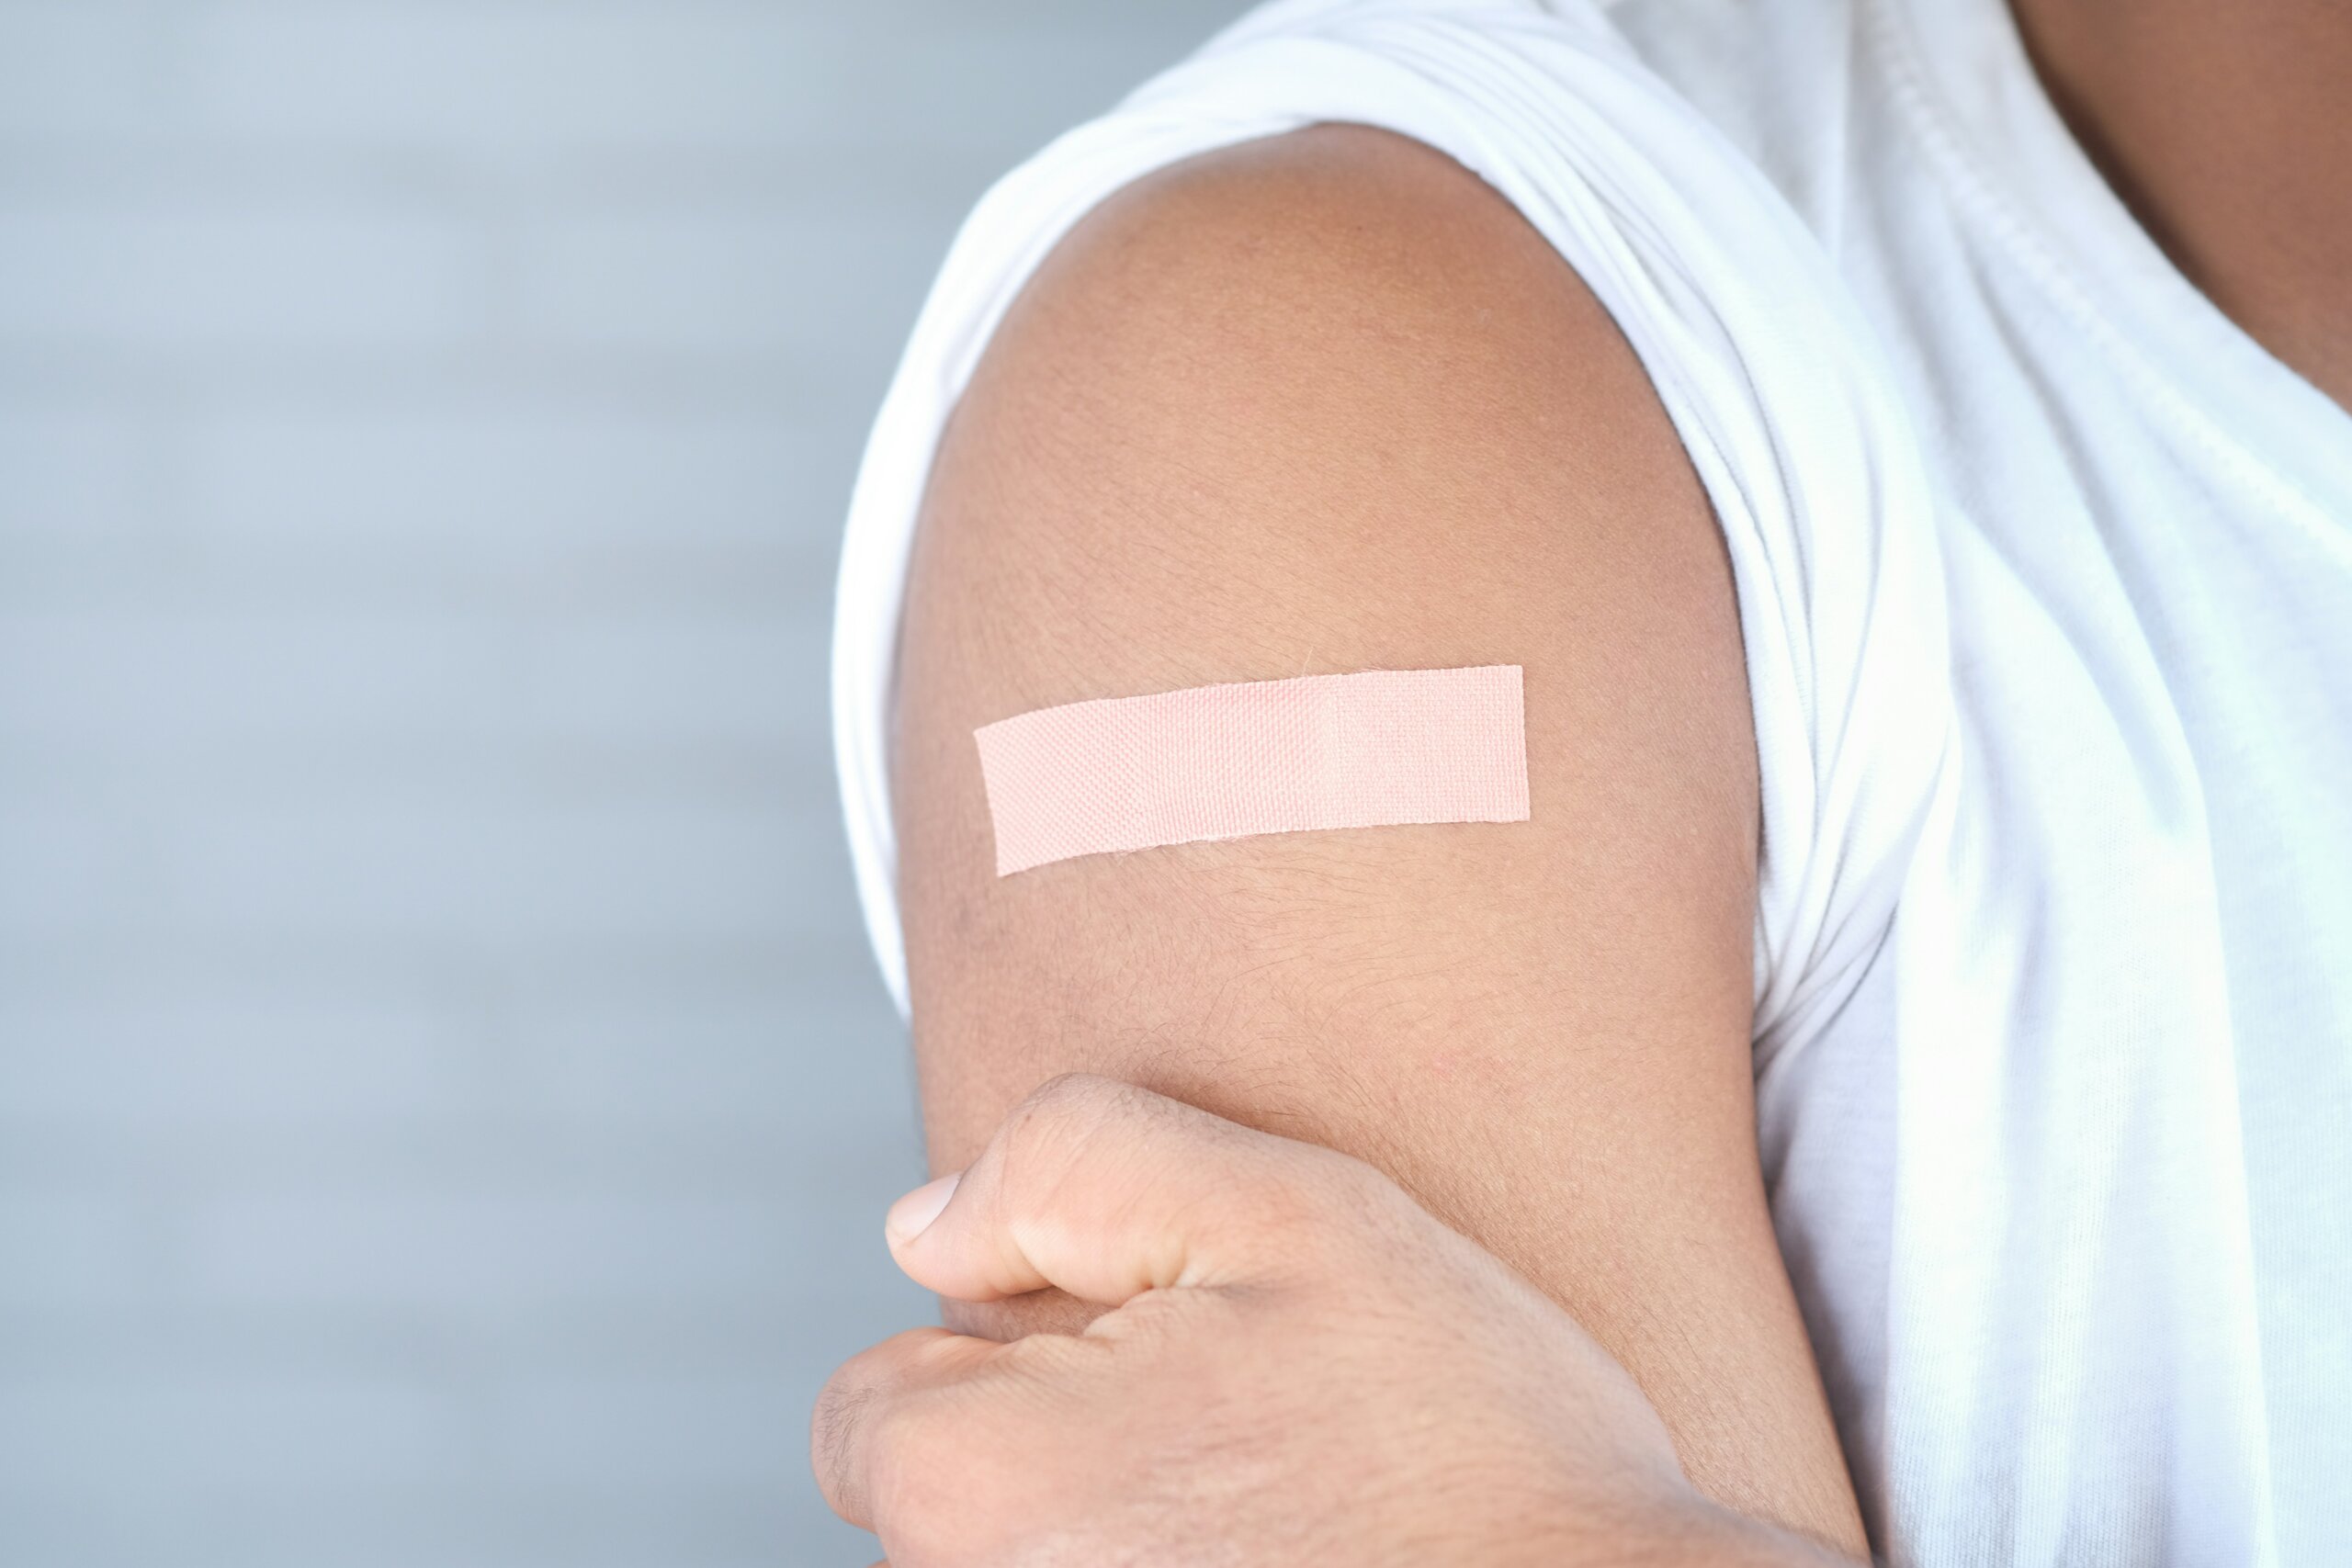 A person's upper arm dressed with medical tape